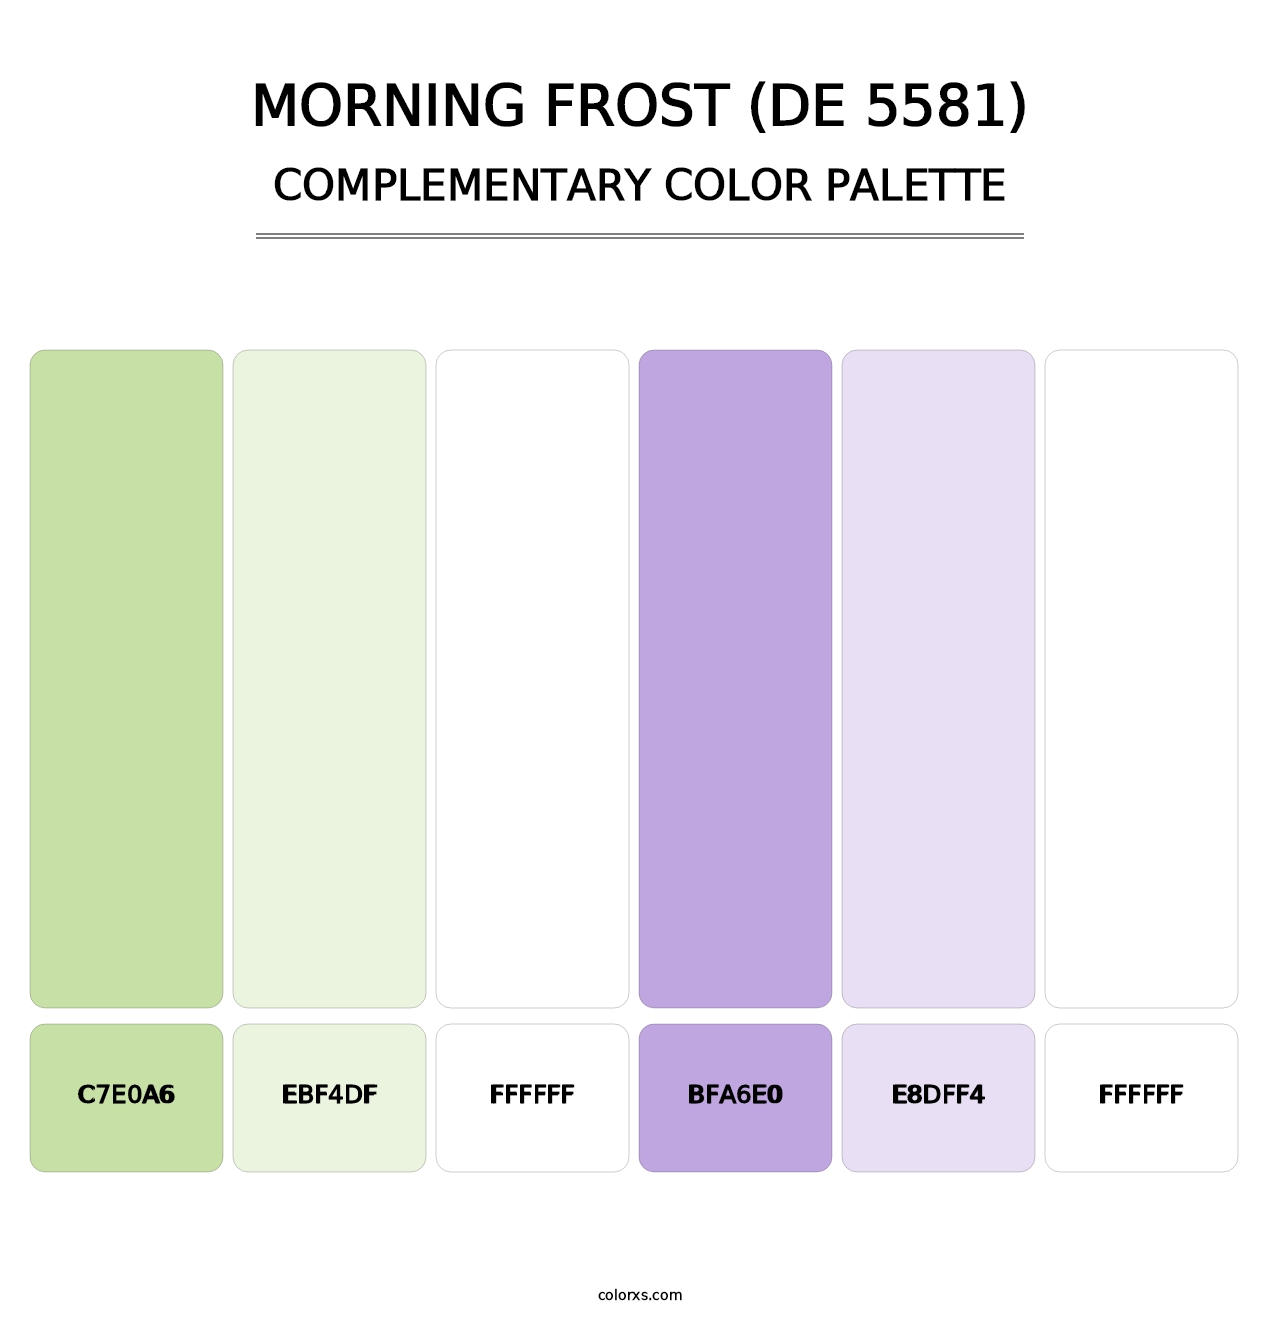 Morning Frost (DE 5581) - Complementary Color Palette